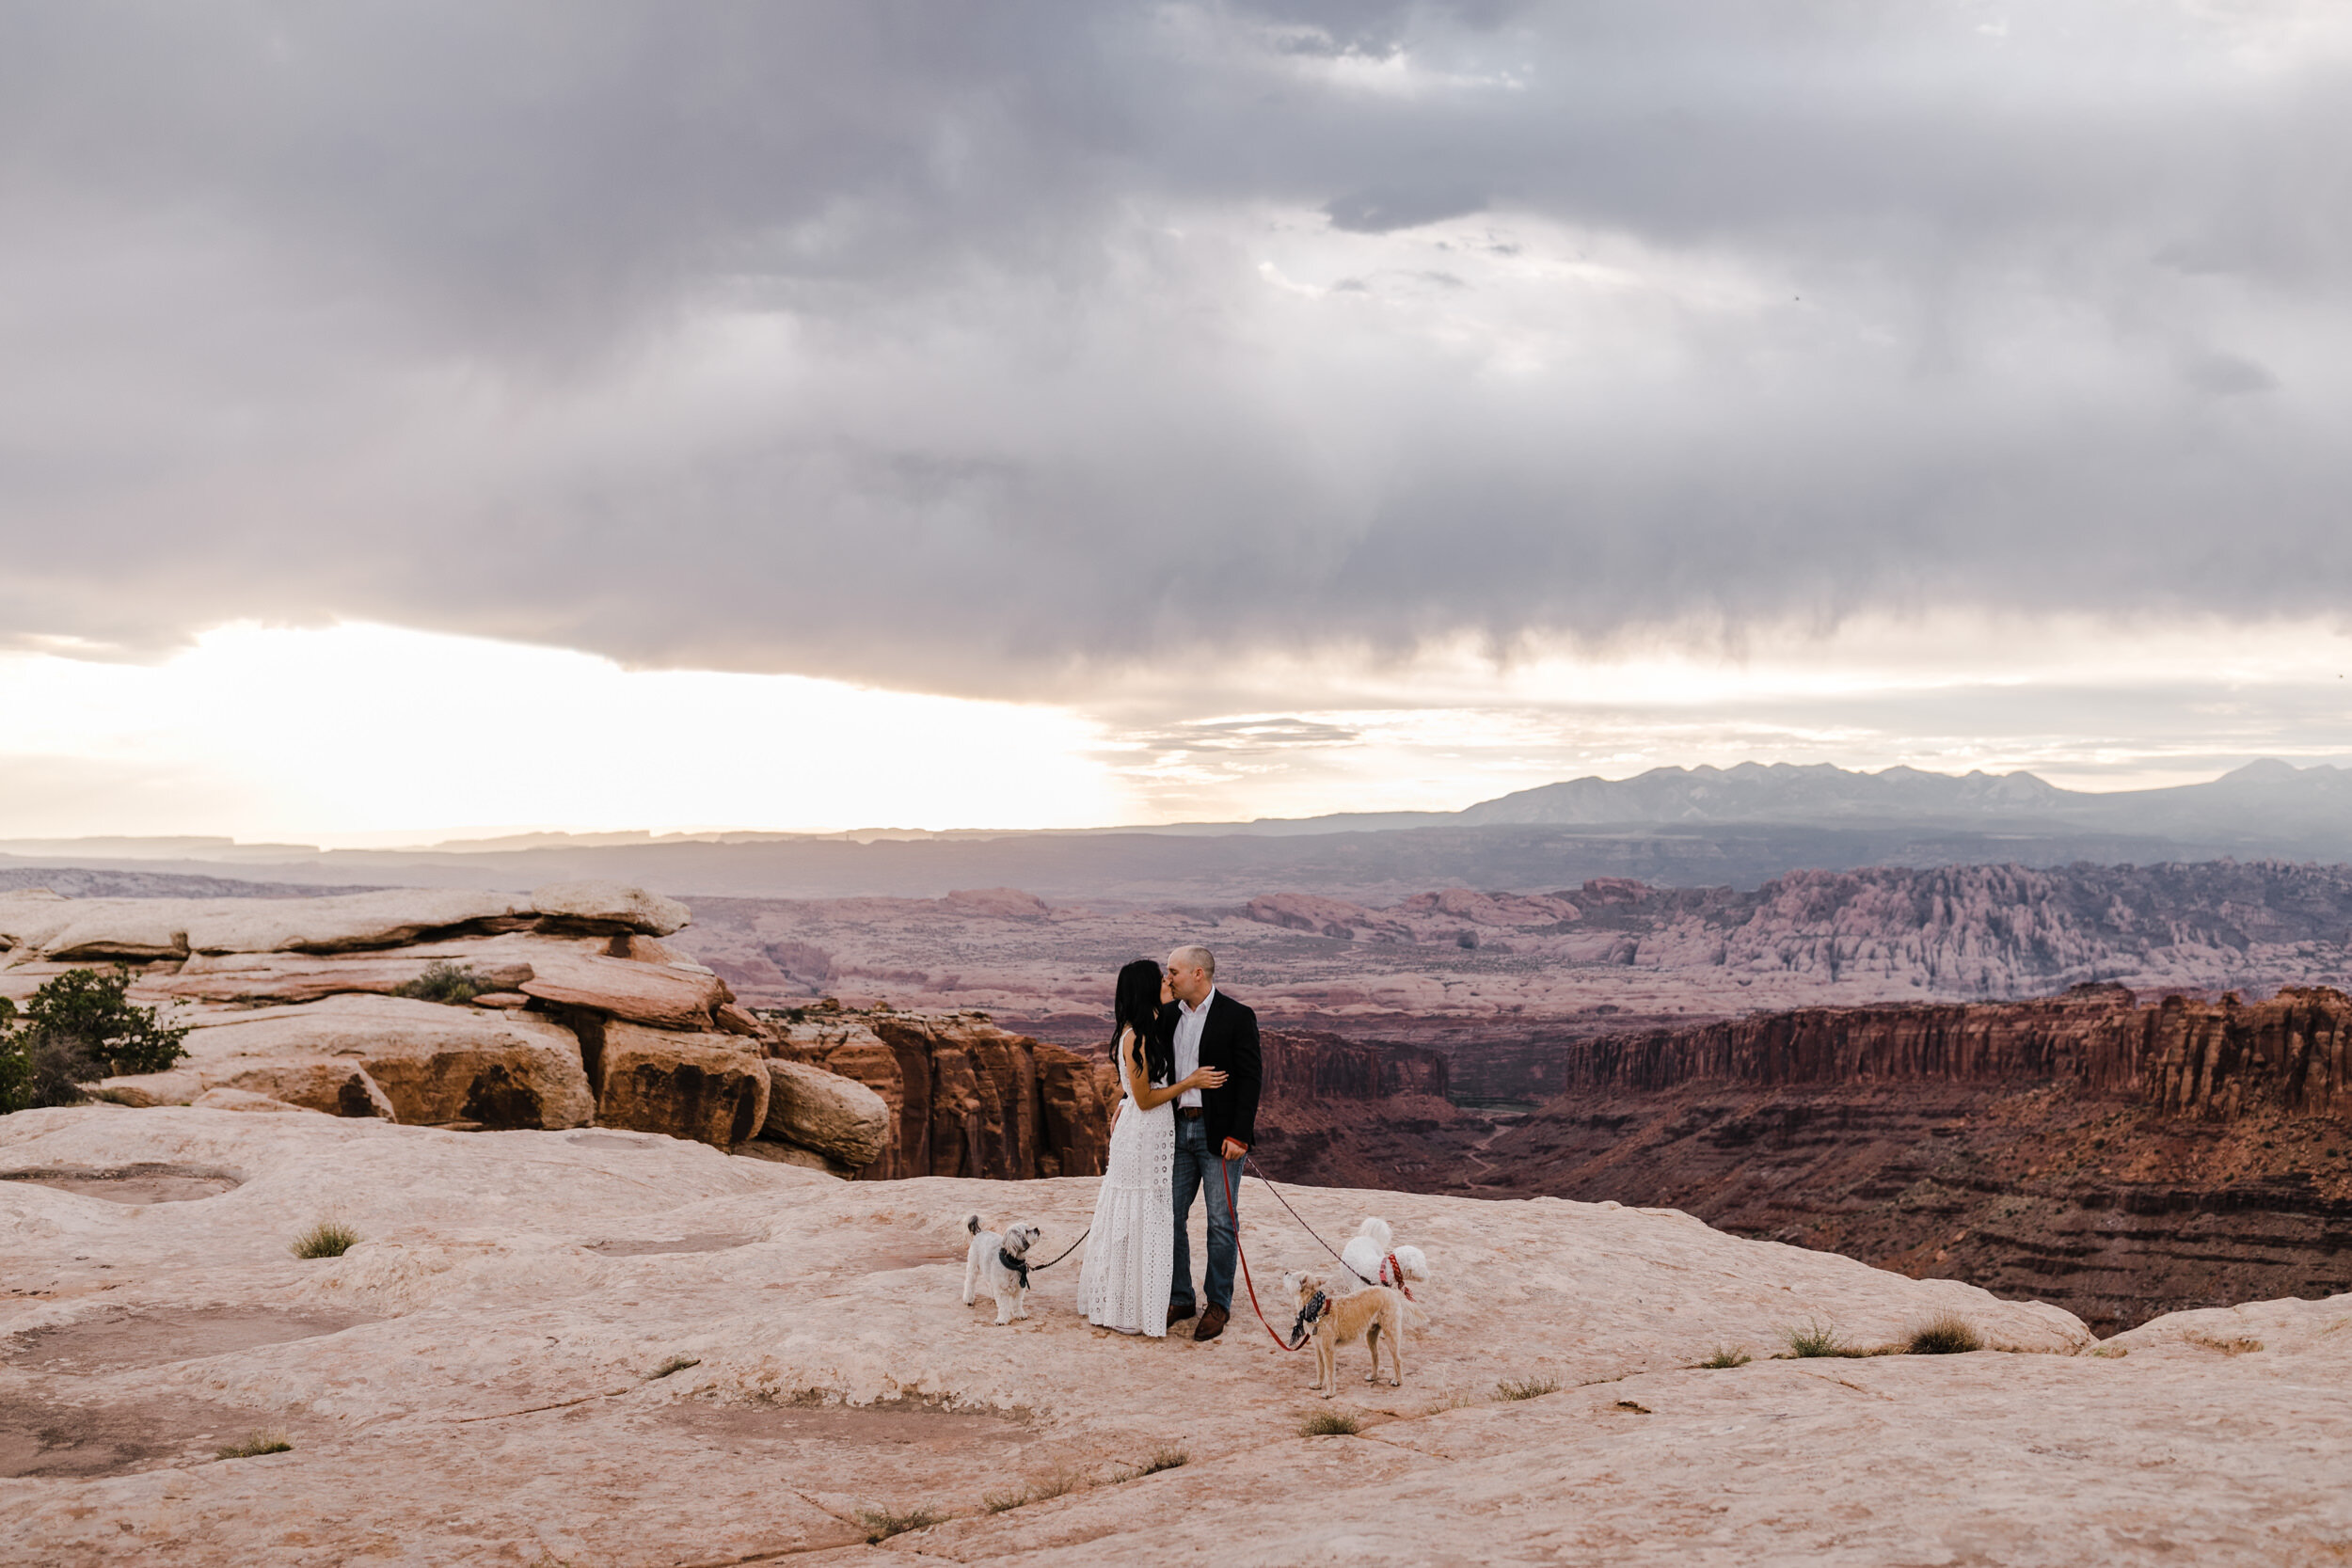 kimi + brett’s sunrise engagement photos in Moab, Utah with their dogs | utah elopement photograpehrs | the hearnes adventure photography